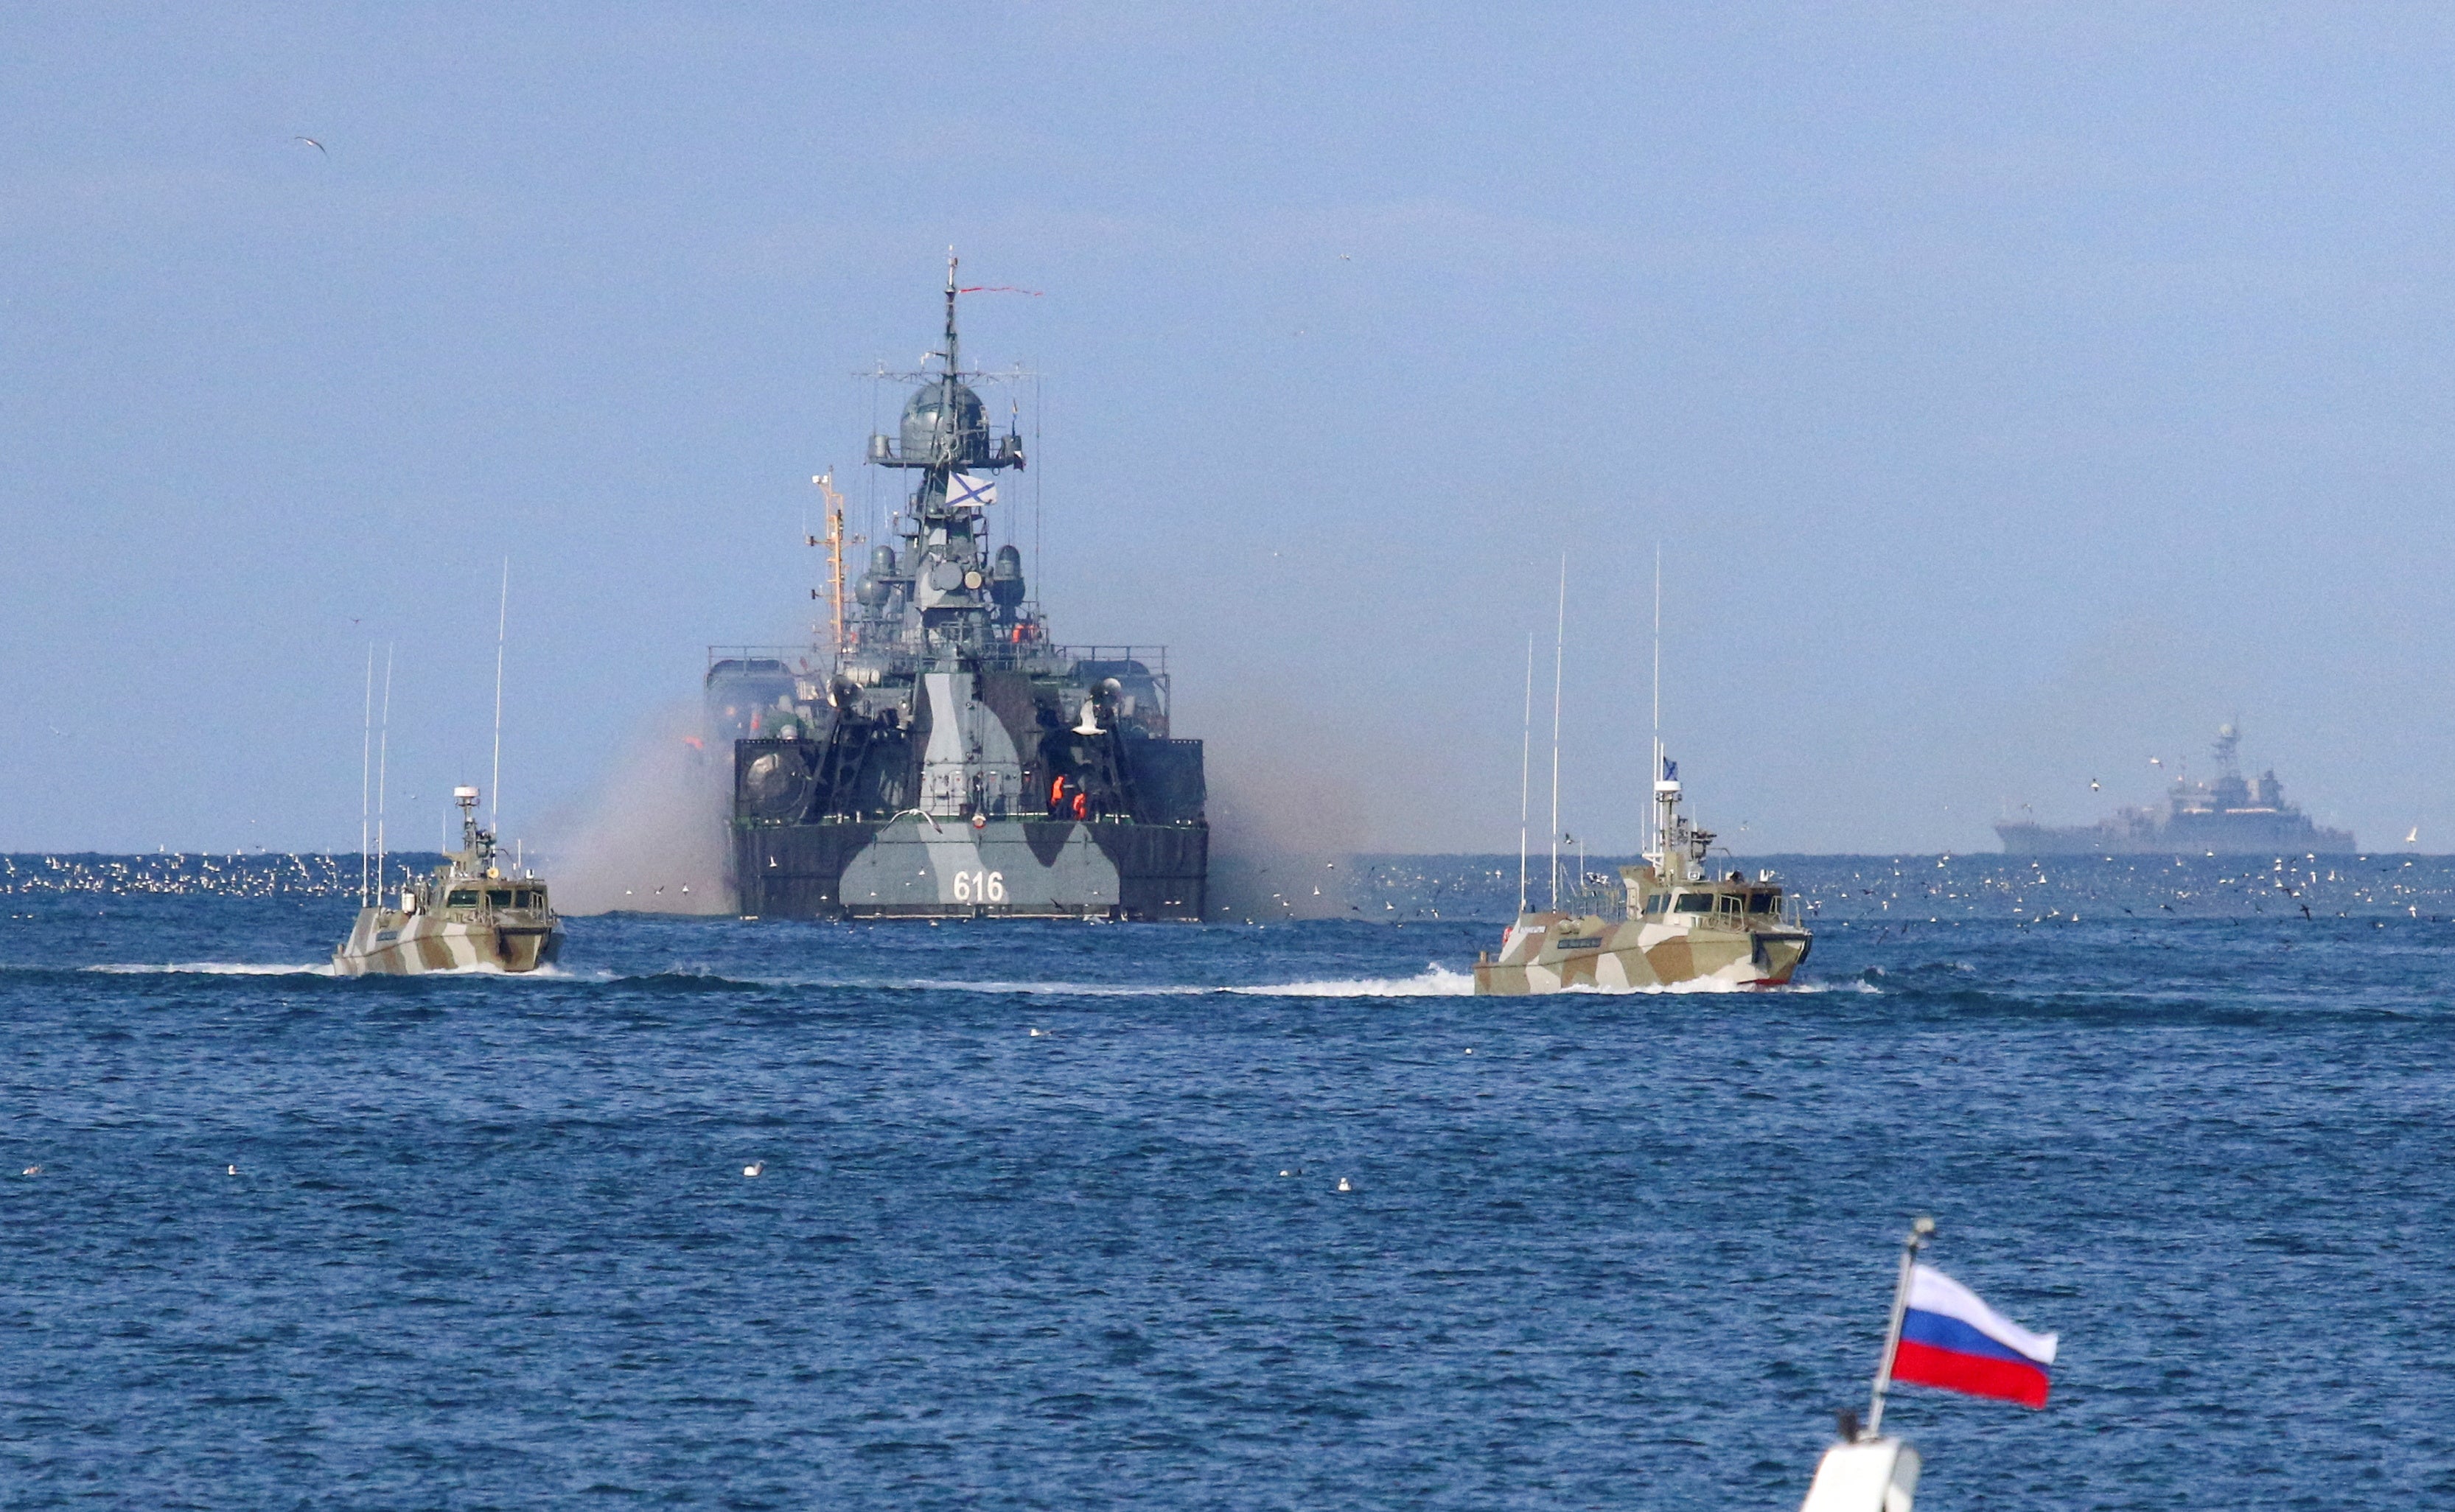 Russian Navy vessels near the Black Sea port of Sevastopol shortly before the invasion was launched